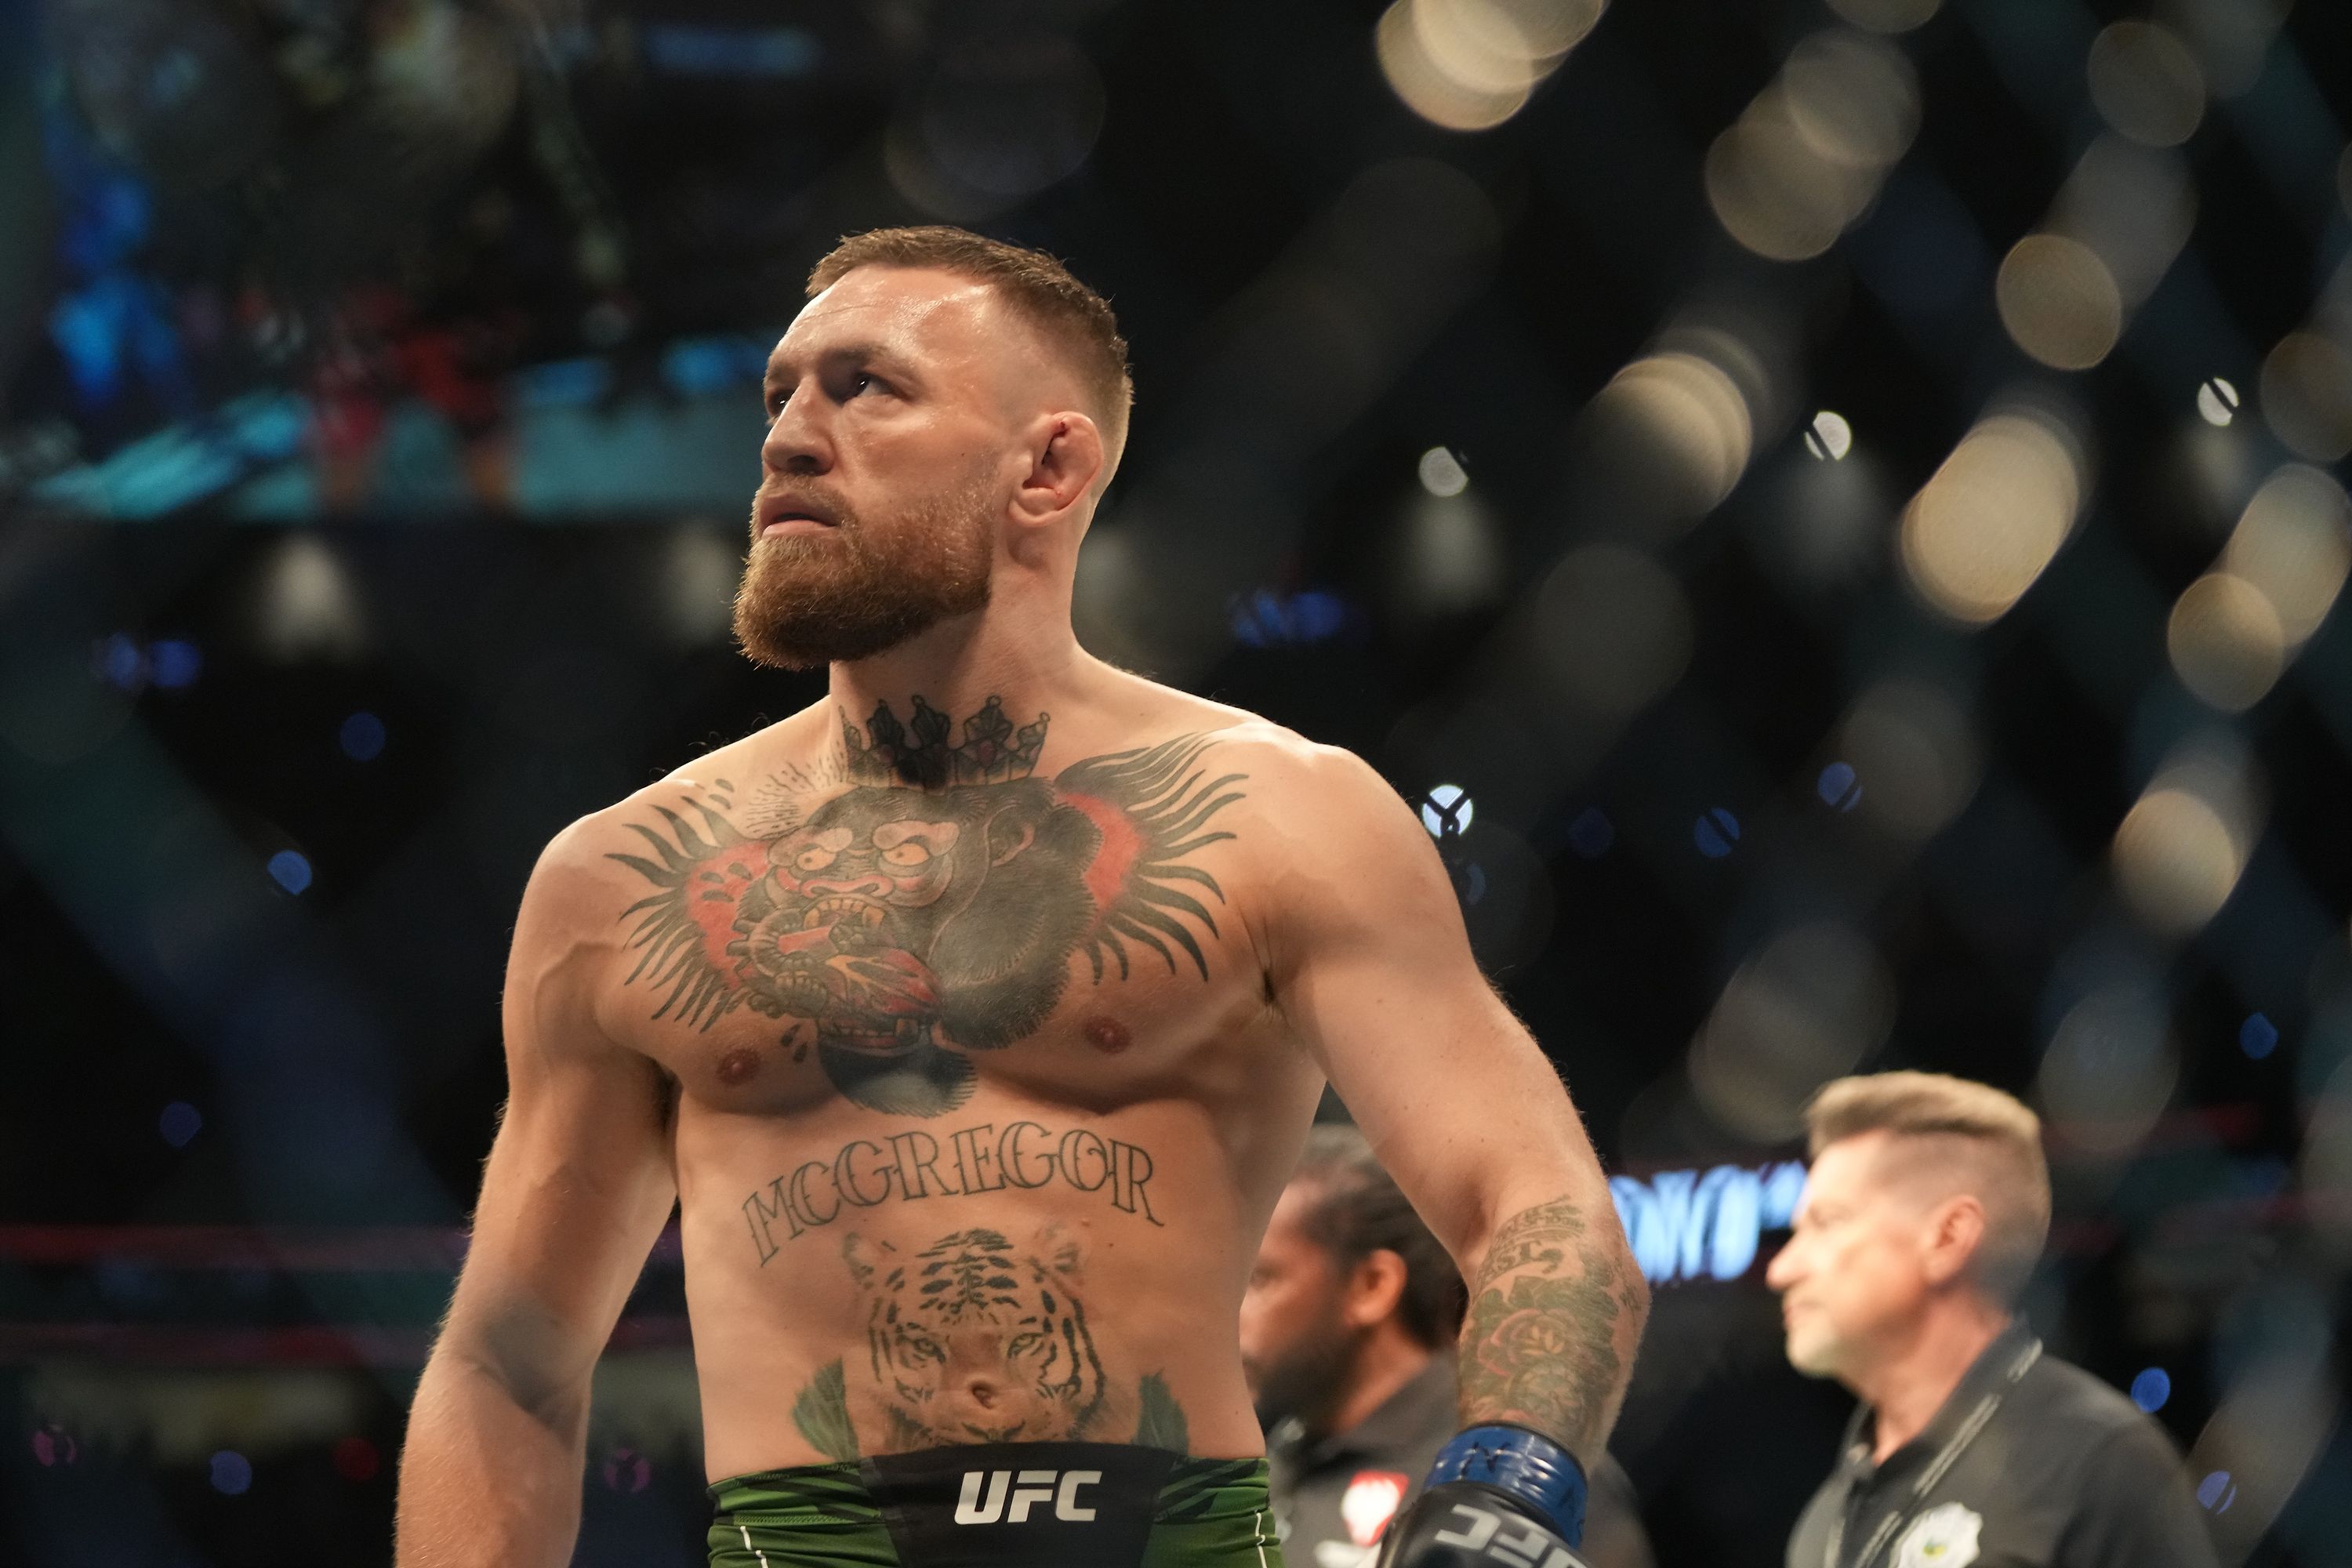 Conor McGregor during UFC 264 at T-Mobile Arena on July 10, 2021, in Las Vegas, Nevada | Source: Getty Images